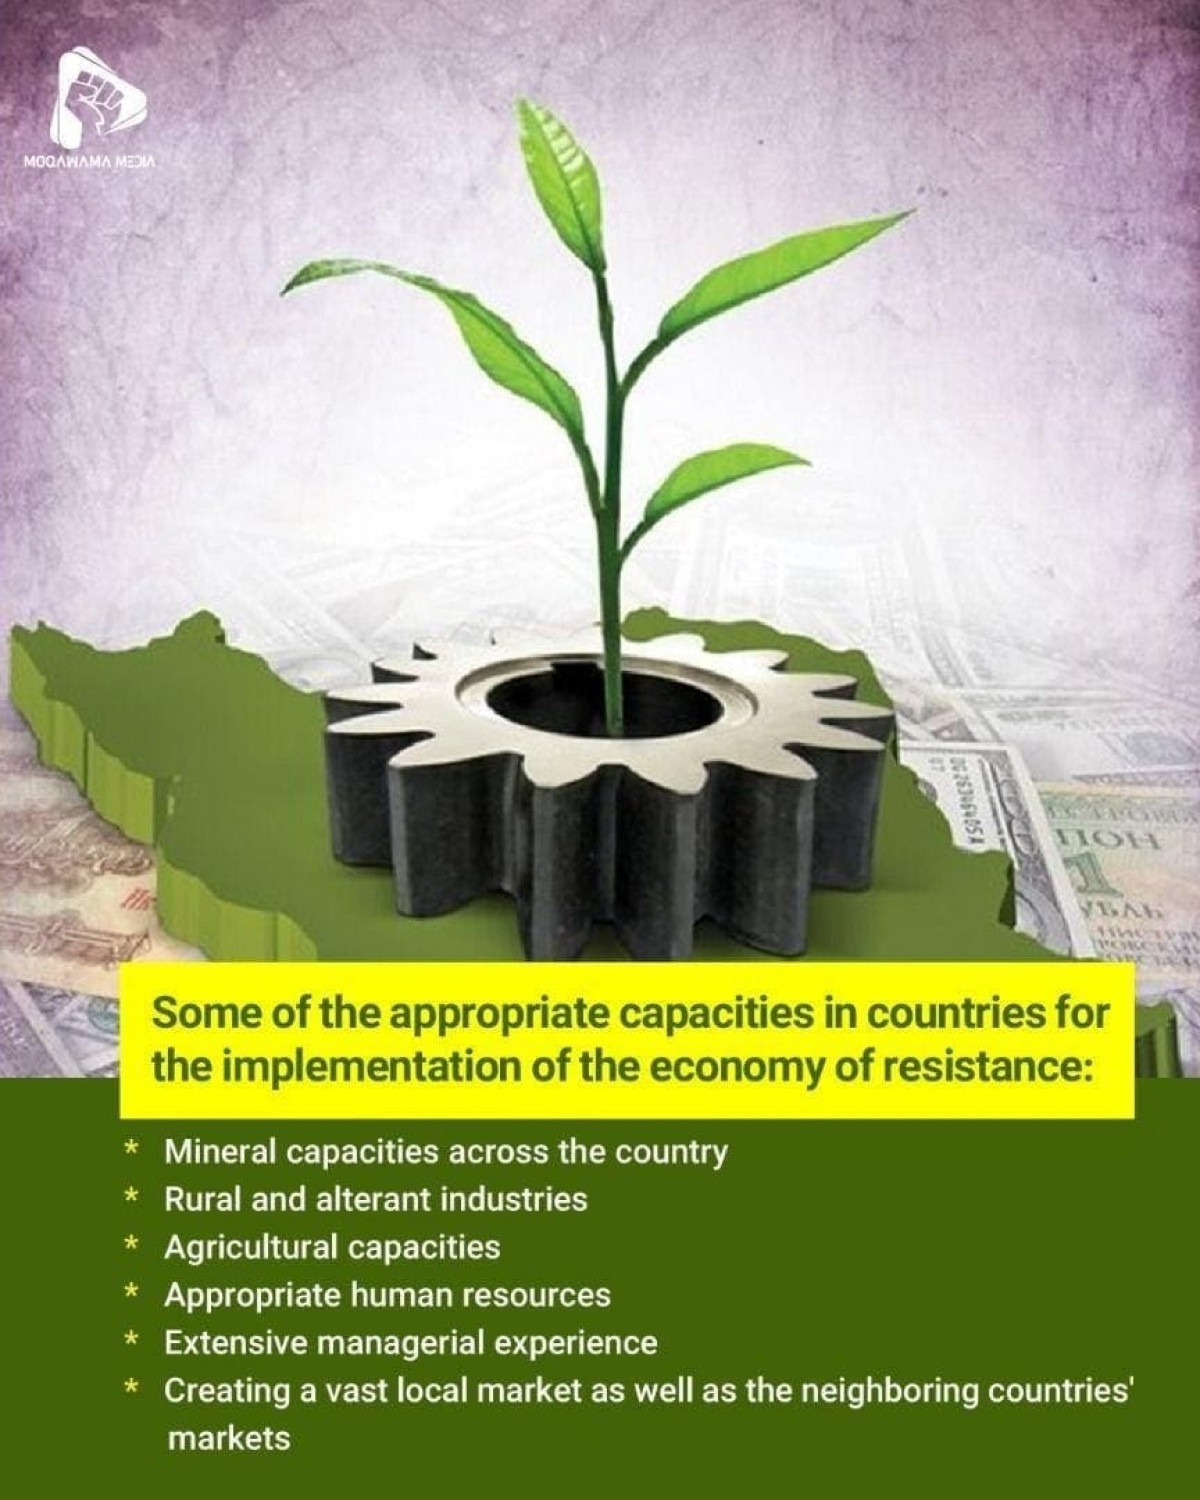 Some of the appropriate capacities in countries for the implementation of the economy of resistance